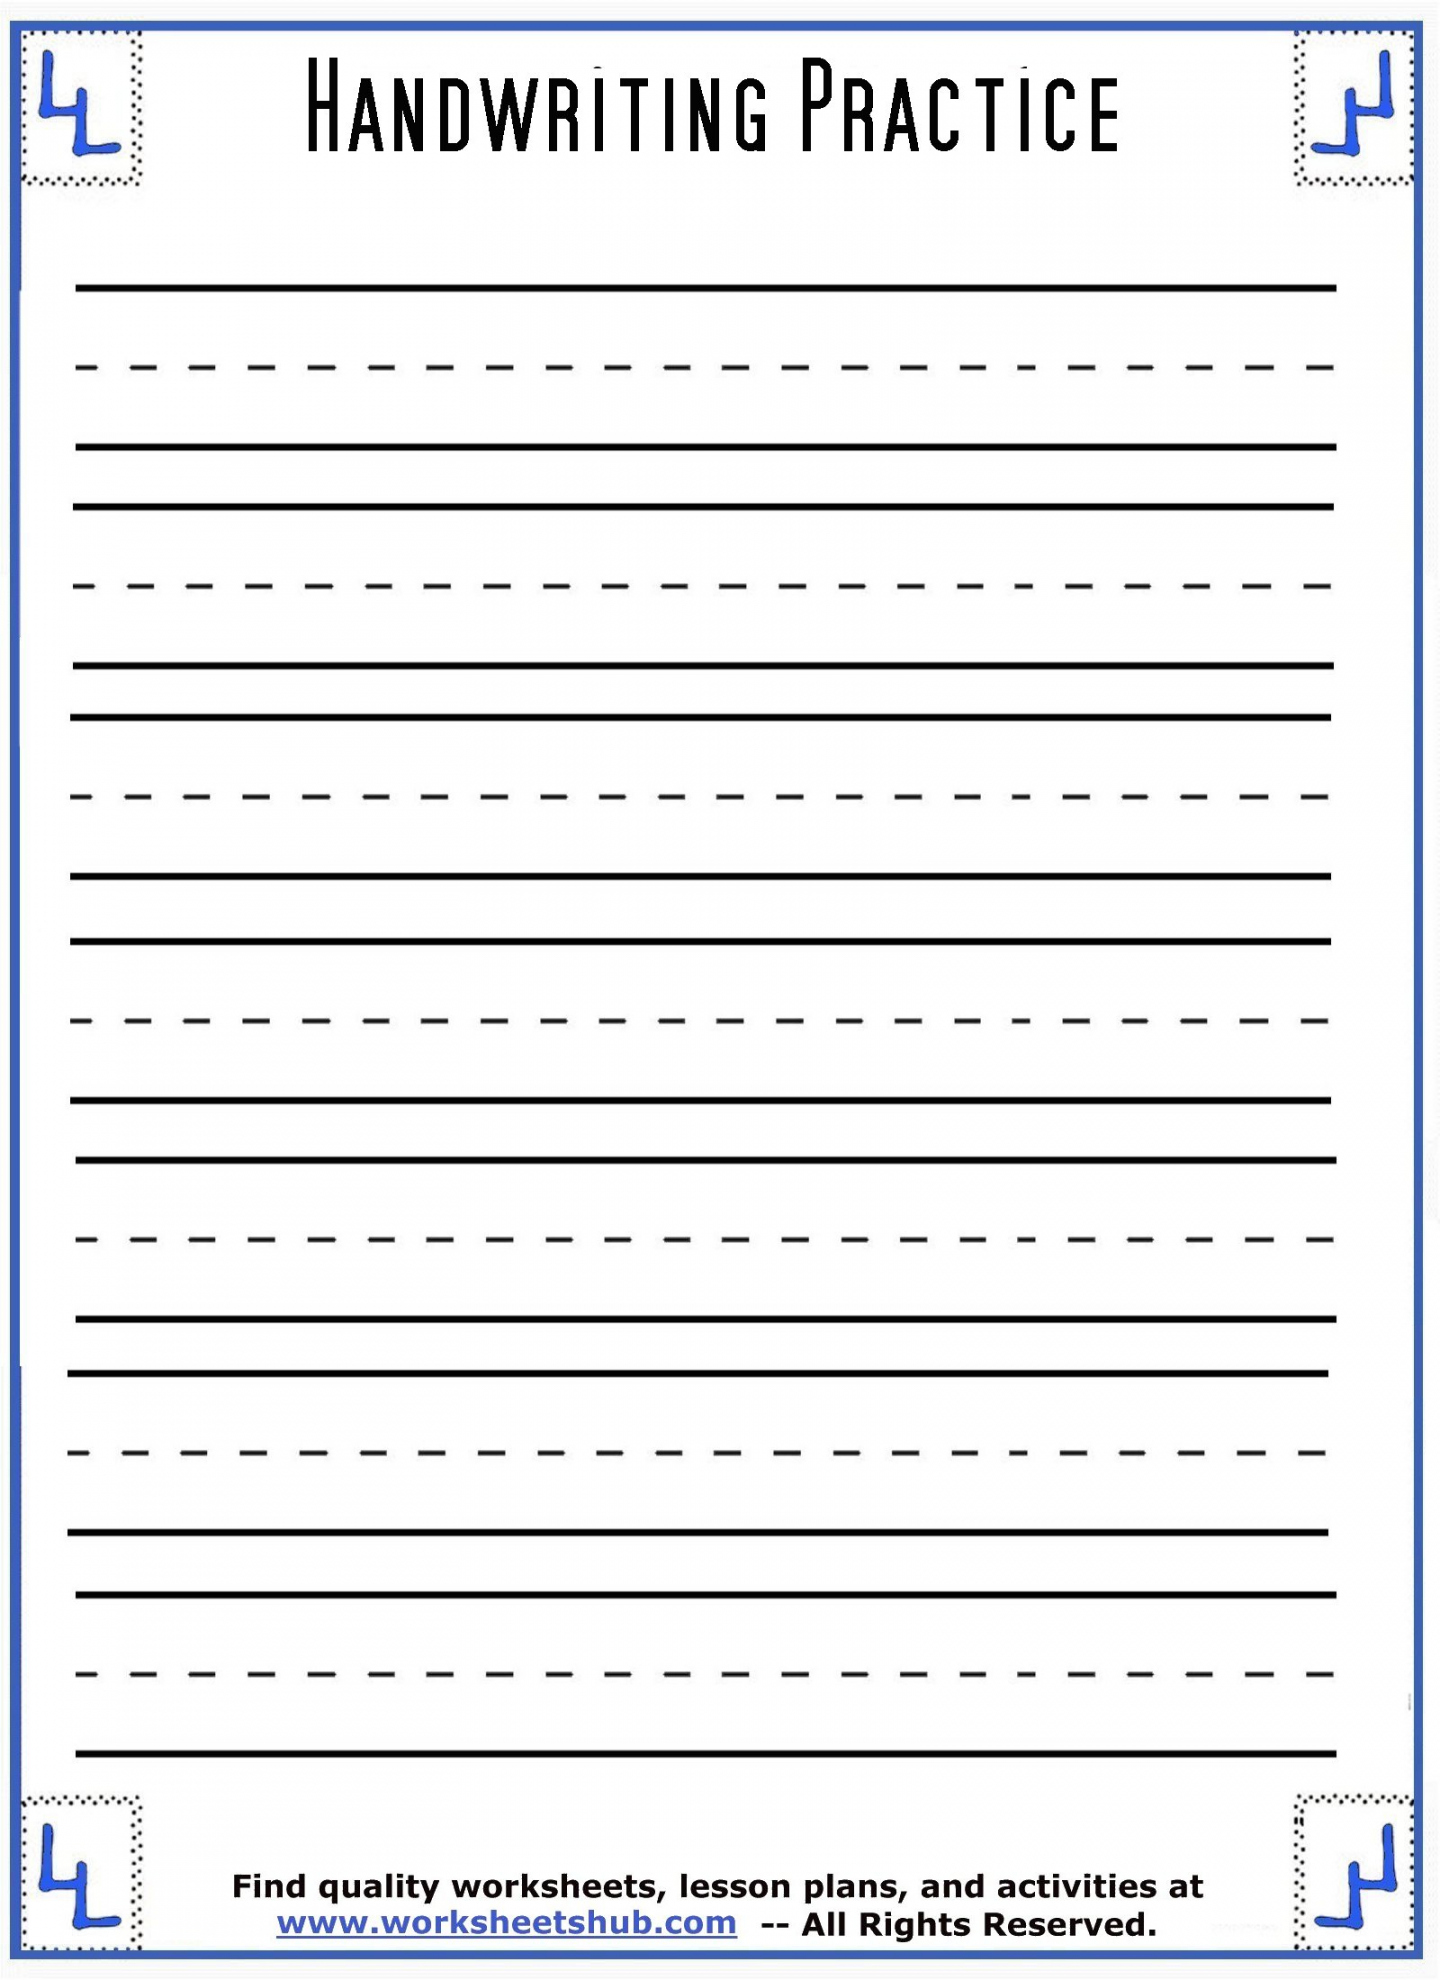 Handwriting Sheets:Printable -Lined Paper - FREE Printables - Handwriting Paper Printable